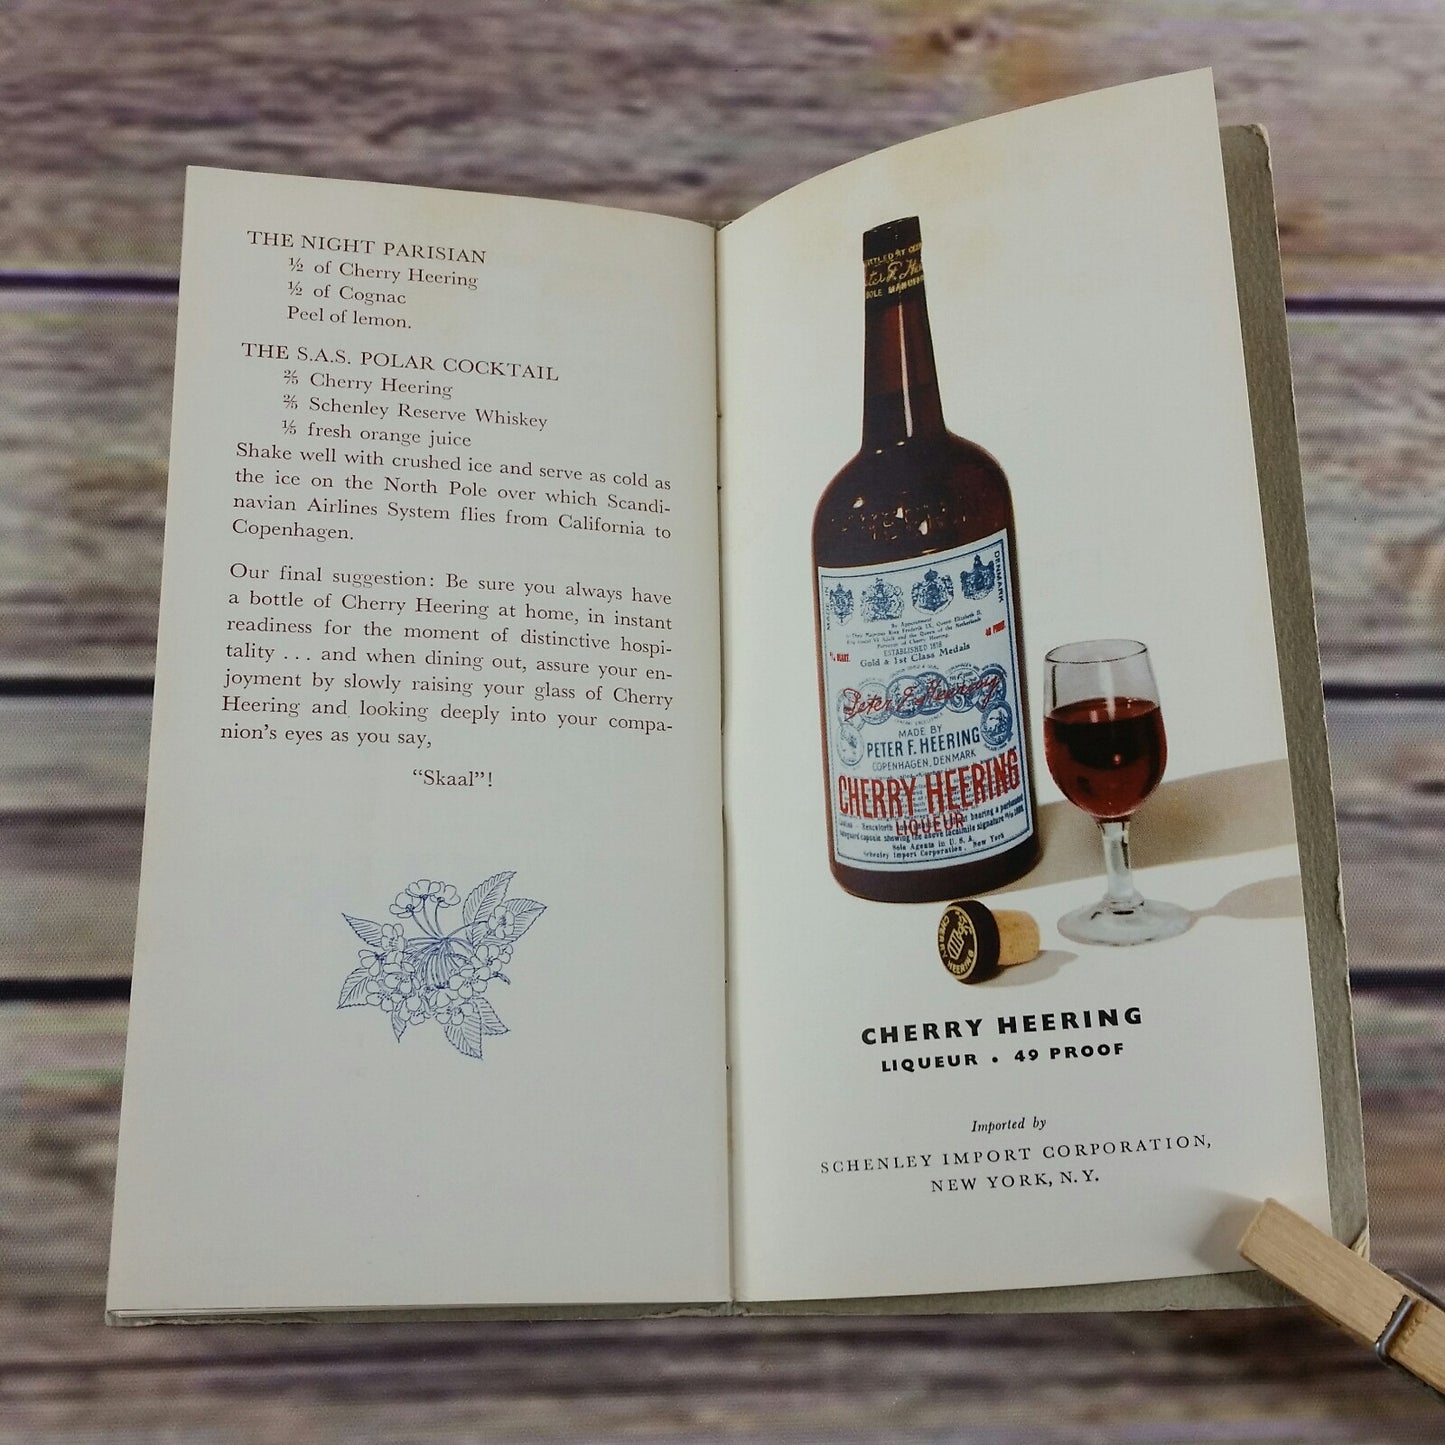 Vintage Cookbook Entertain Differently in the Danish Manner 1956 Cherry Heering Liqueur Alcohol Promo Booklet Denmark - At Grandma's Table